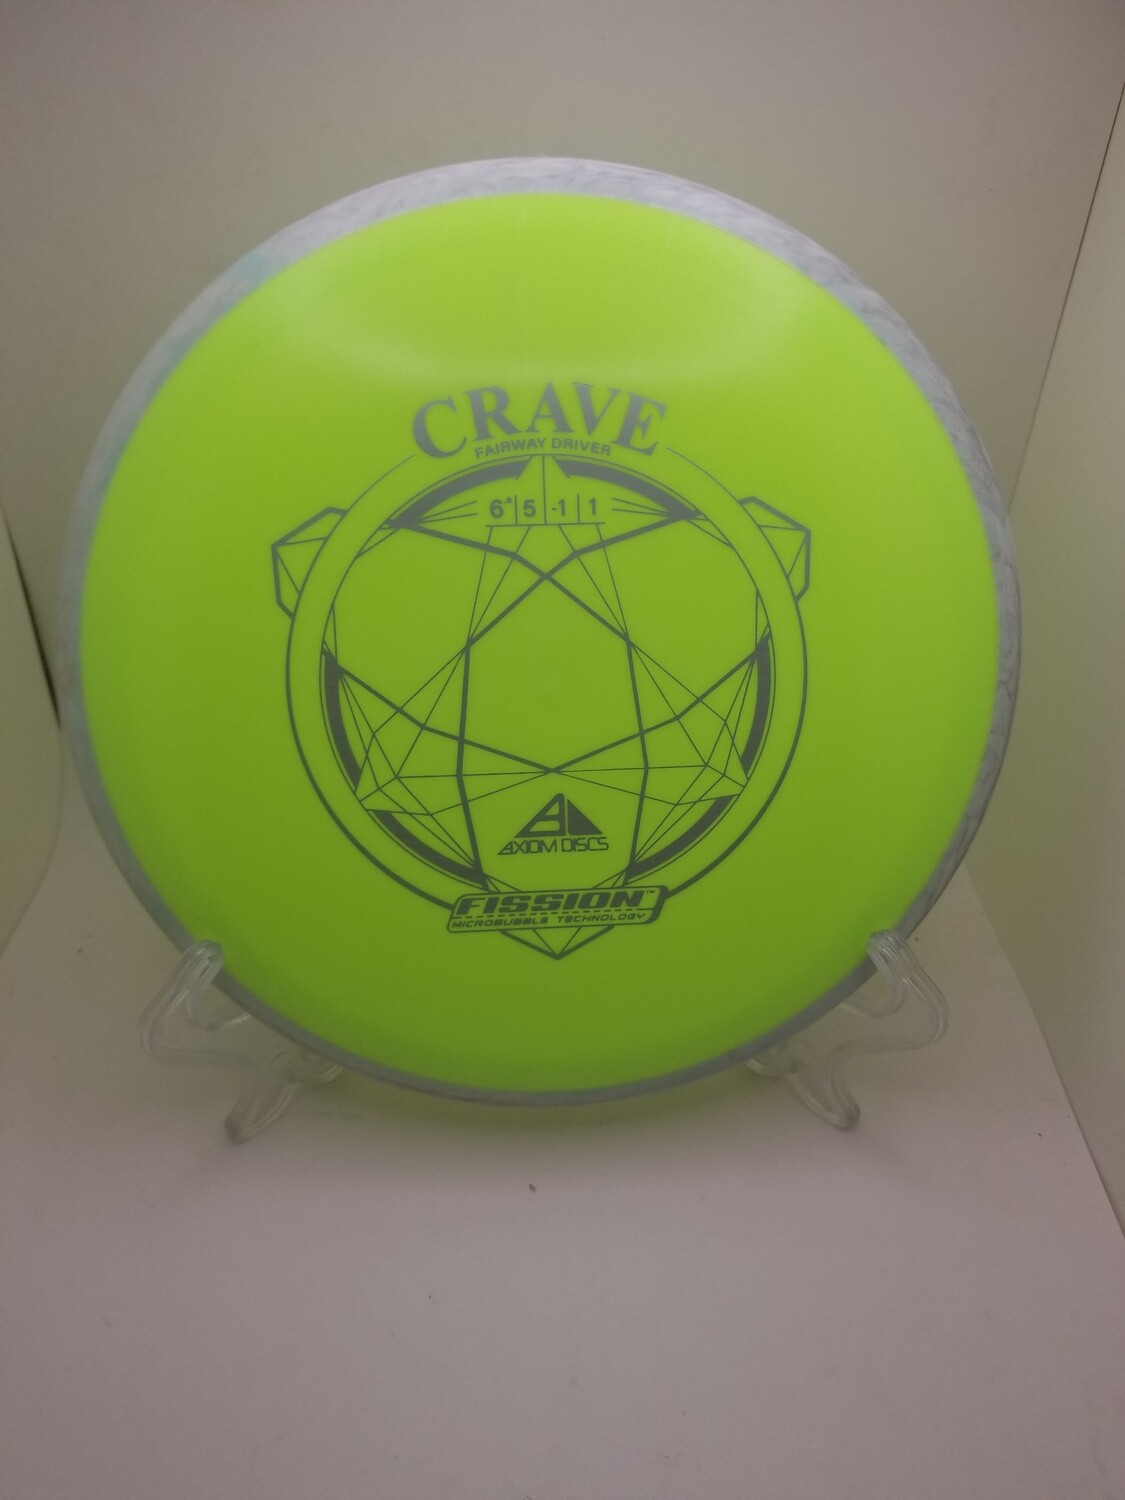 Axiom Discs Crave DayGlow Green with Grey and White Swirl Rim Fission Stamped 150g